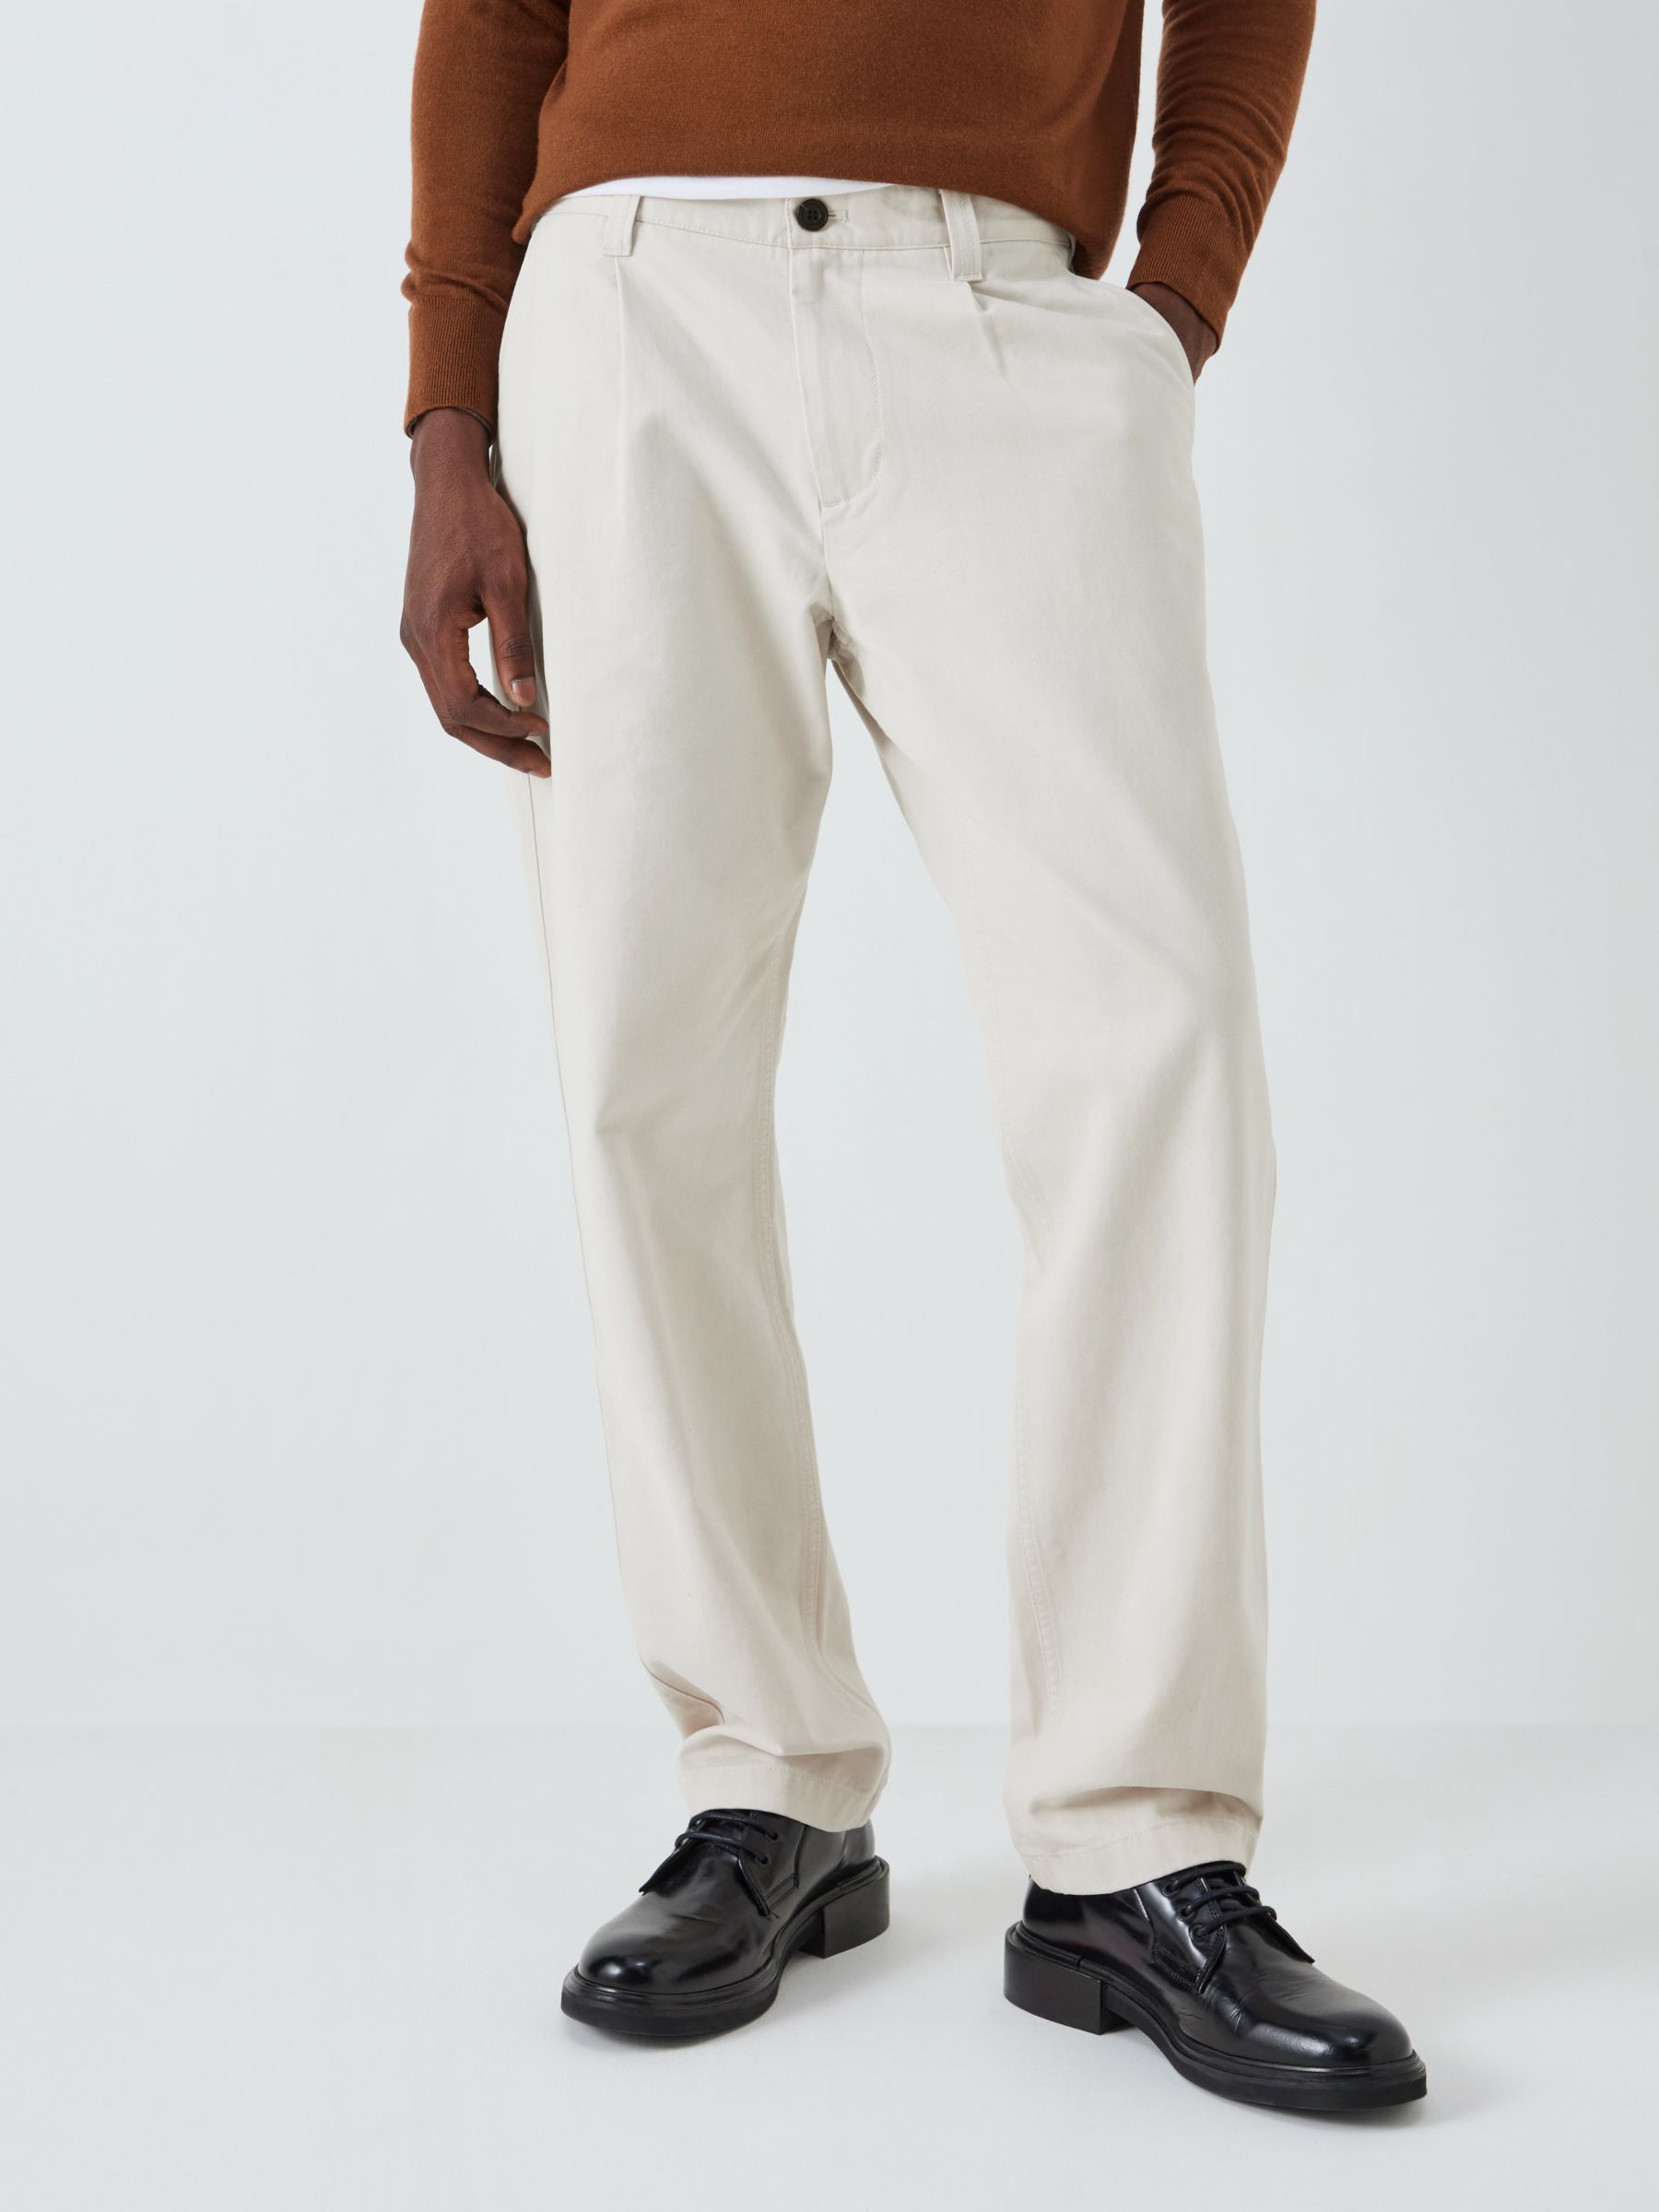 John Lewis Relaxed Fit Cotton Chinos, Ecru, 32S